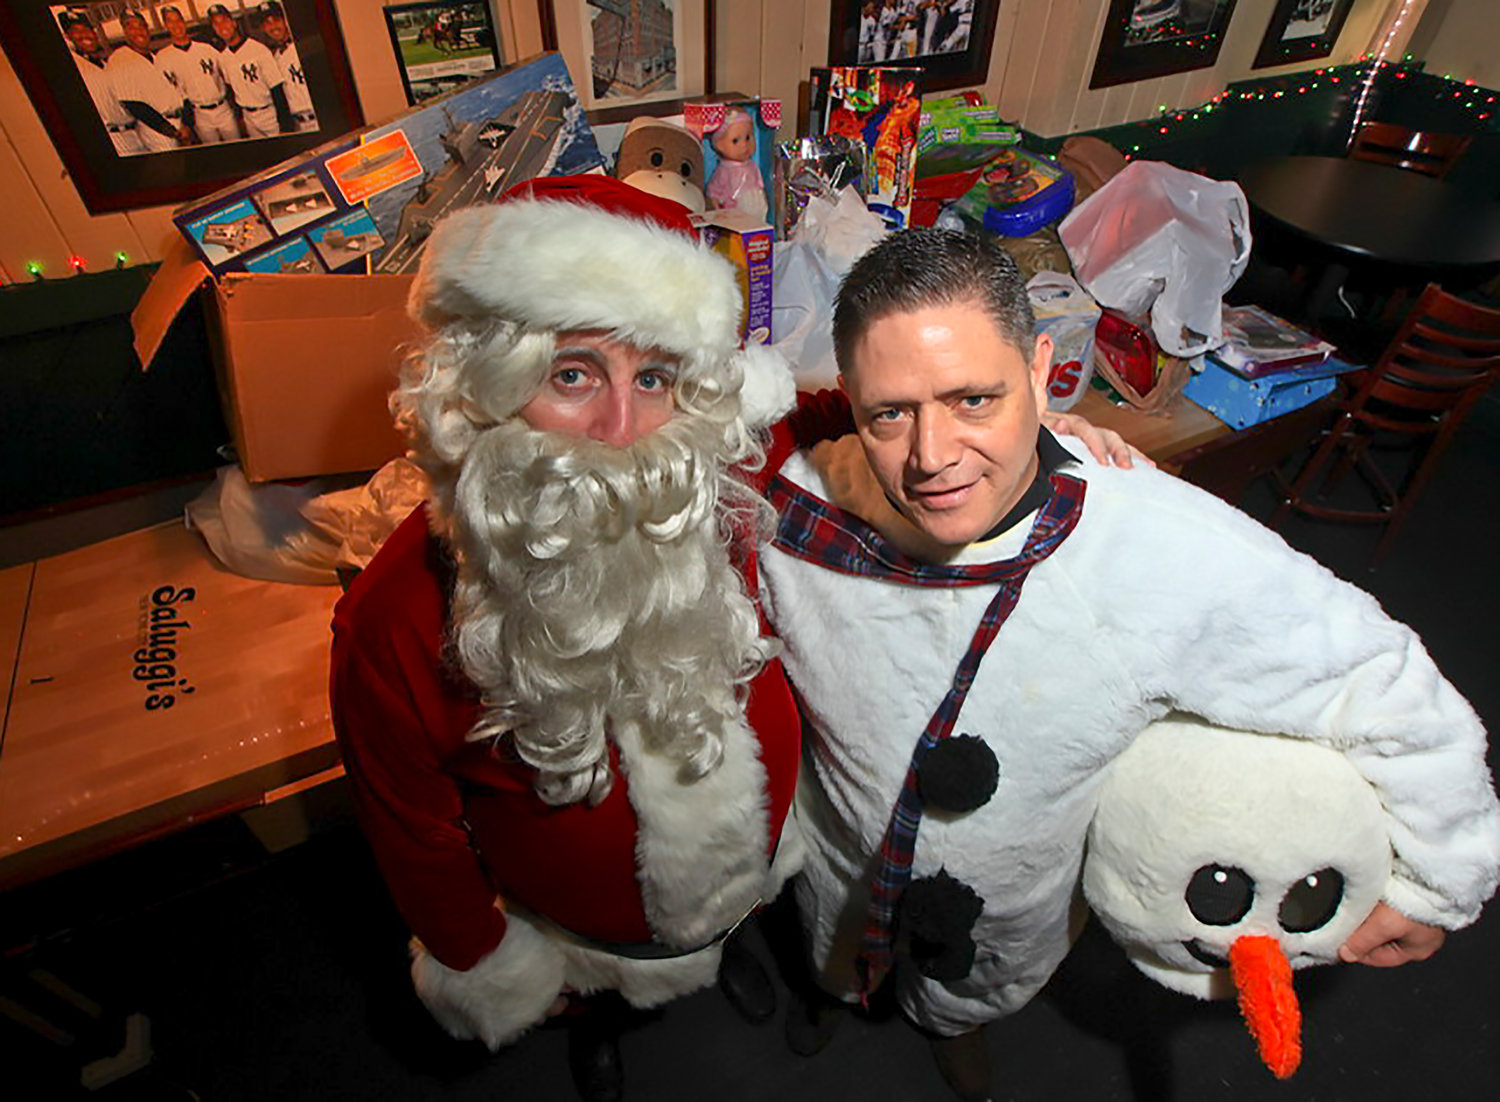 Every year for the past three decades, Terence Mulvey, left, and best friend Richard Walsh held a holiday toy drive for sick children who were patients at NewYork-Presbyterian Morgan Stanley Children's Hospital. Mulvey, who died earlier this month, dressed up as Santa Claus and go room-to-room handing out toys.